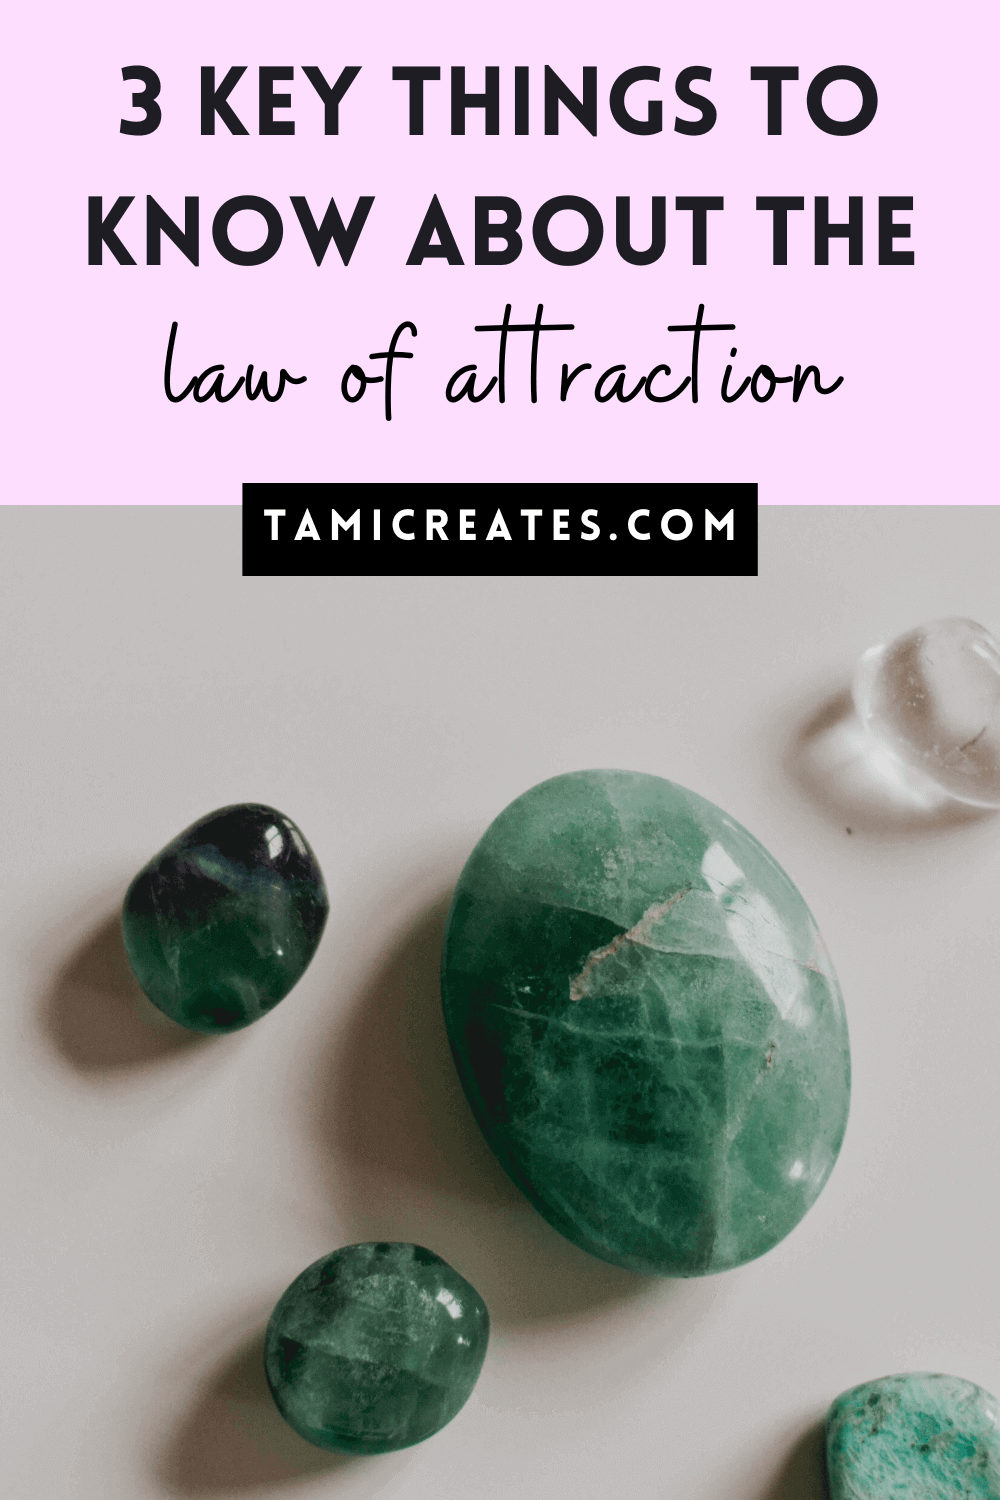 The law of attraction is a very popular topic, but there are still so many misconceptions about it. Here are 3 key things to know about the law of attraction!